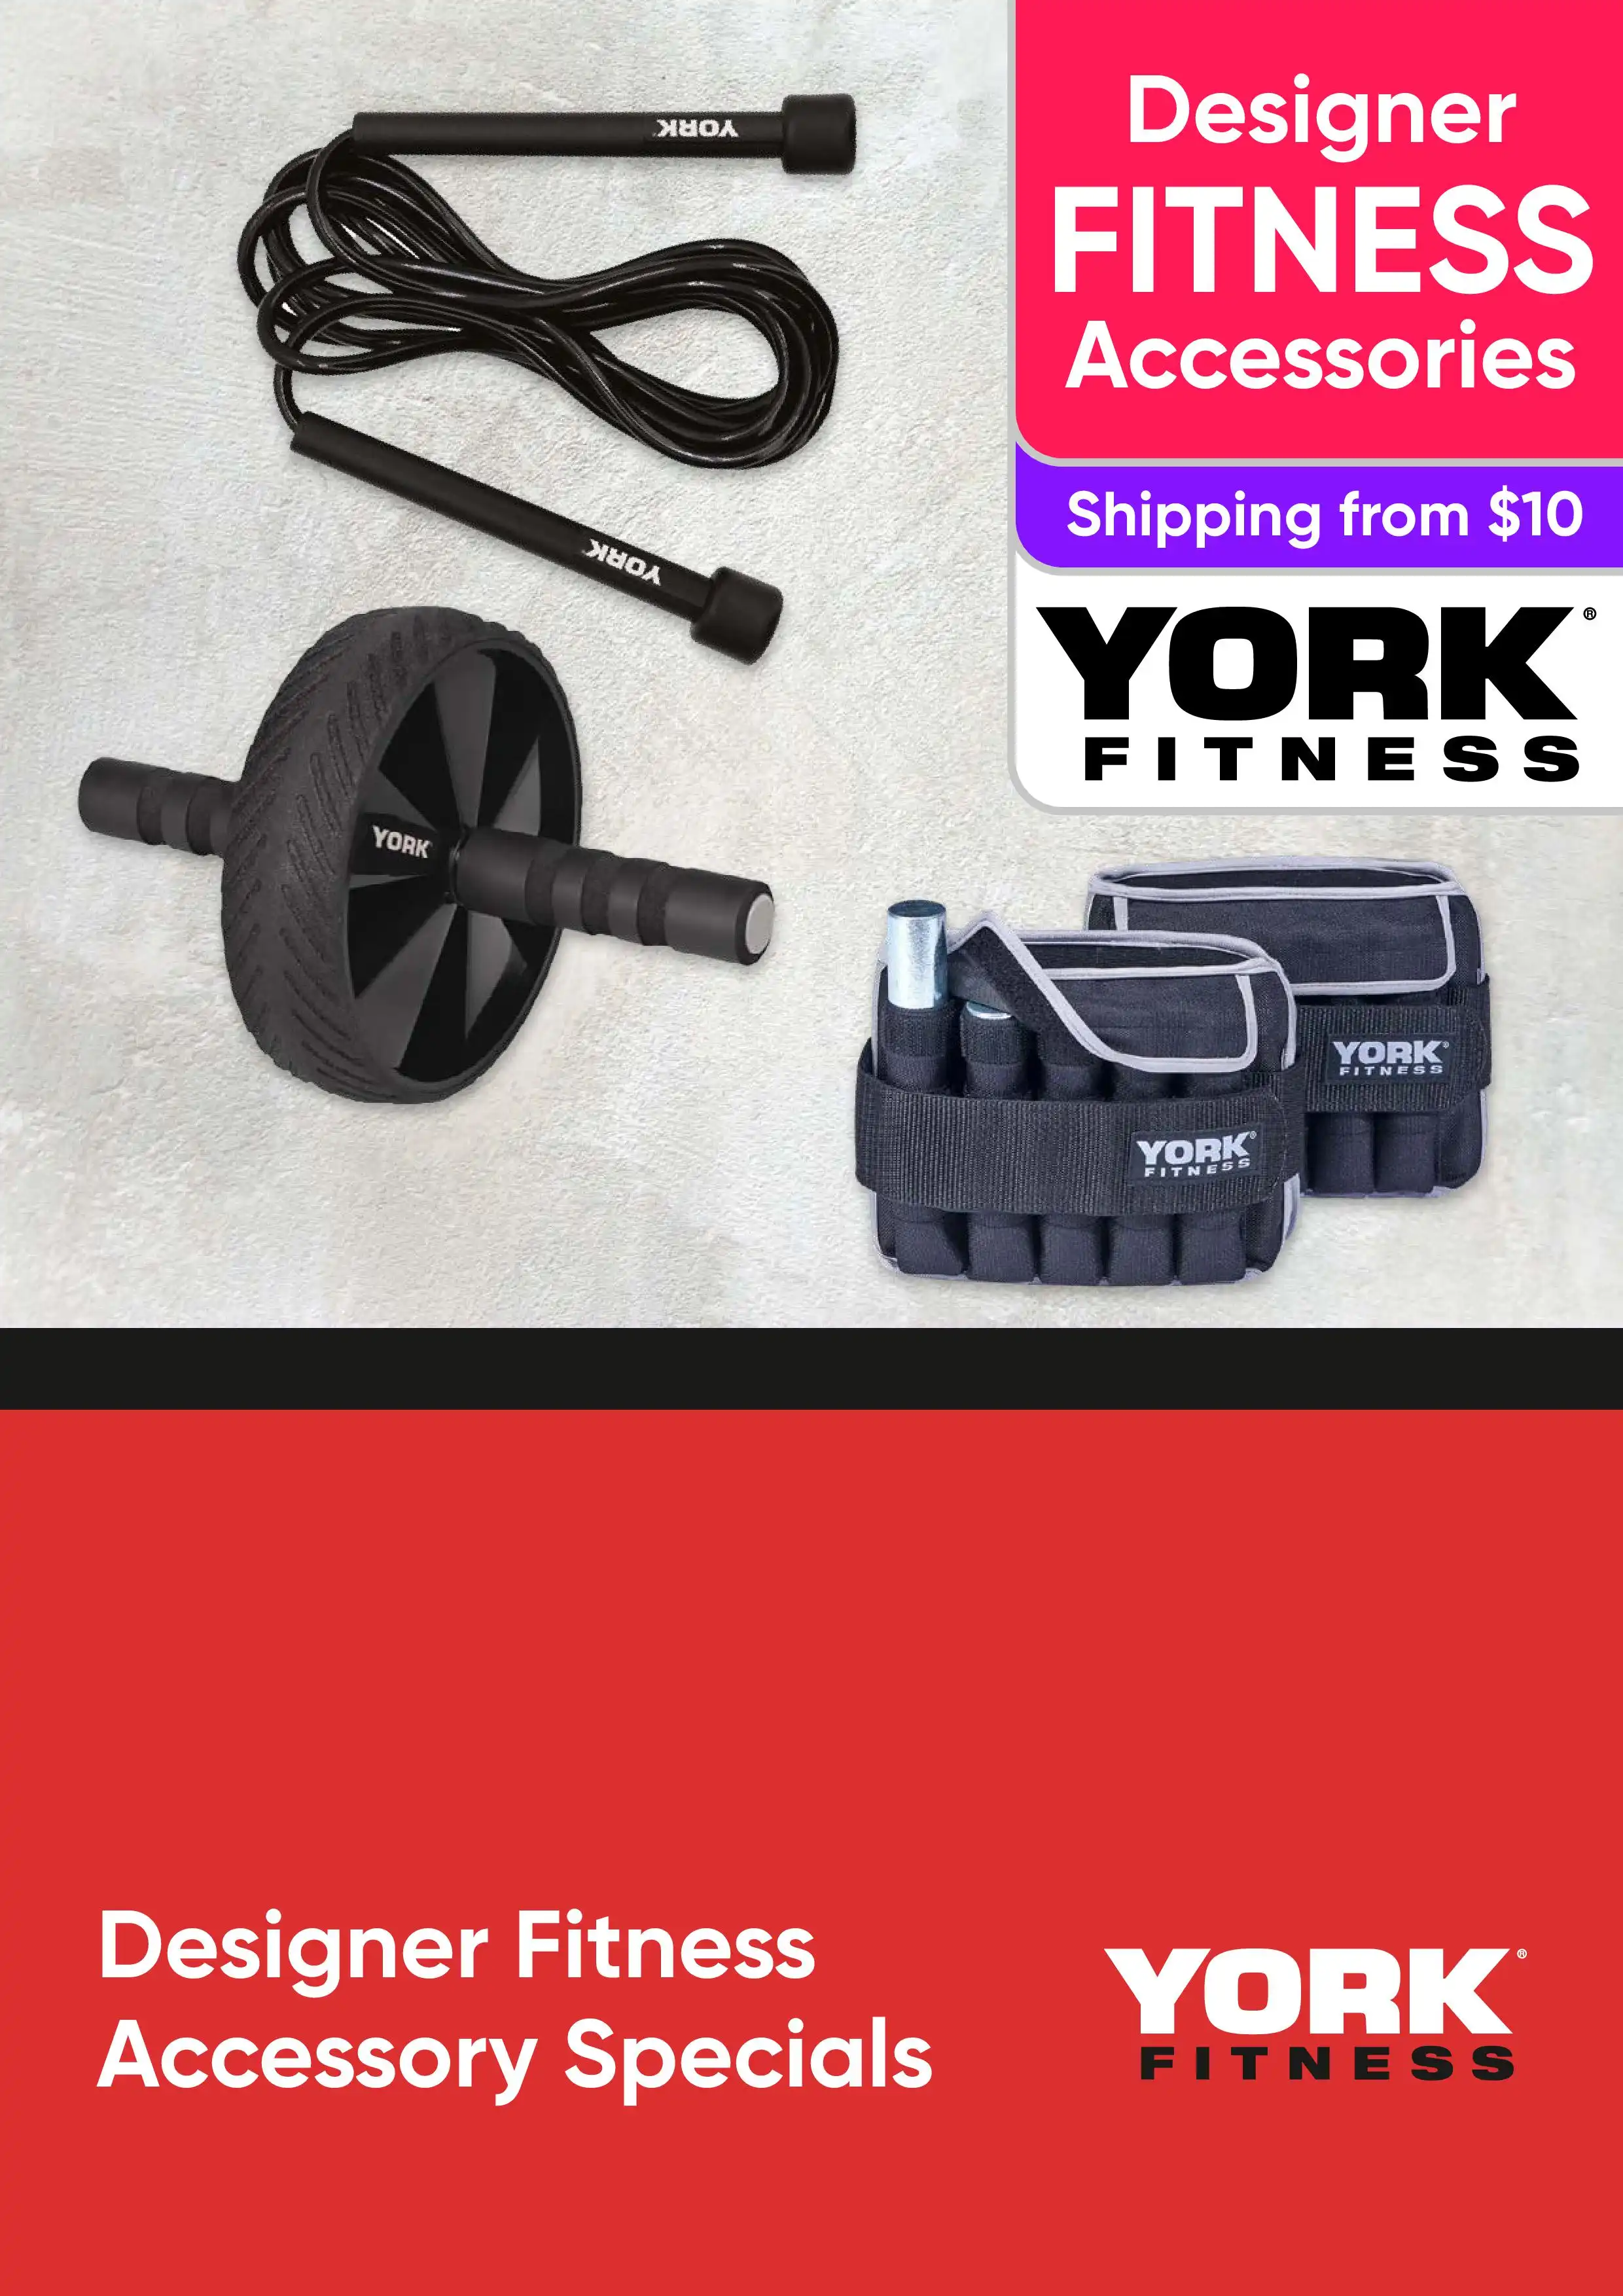 Specials on York Fitness Accessories – Dumbbells, Kettlebells, Resistance Bands and More